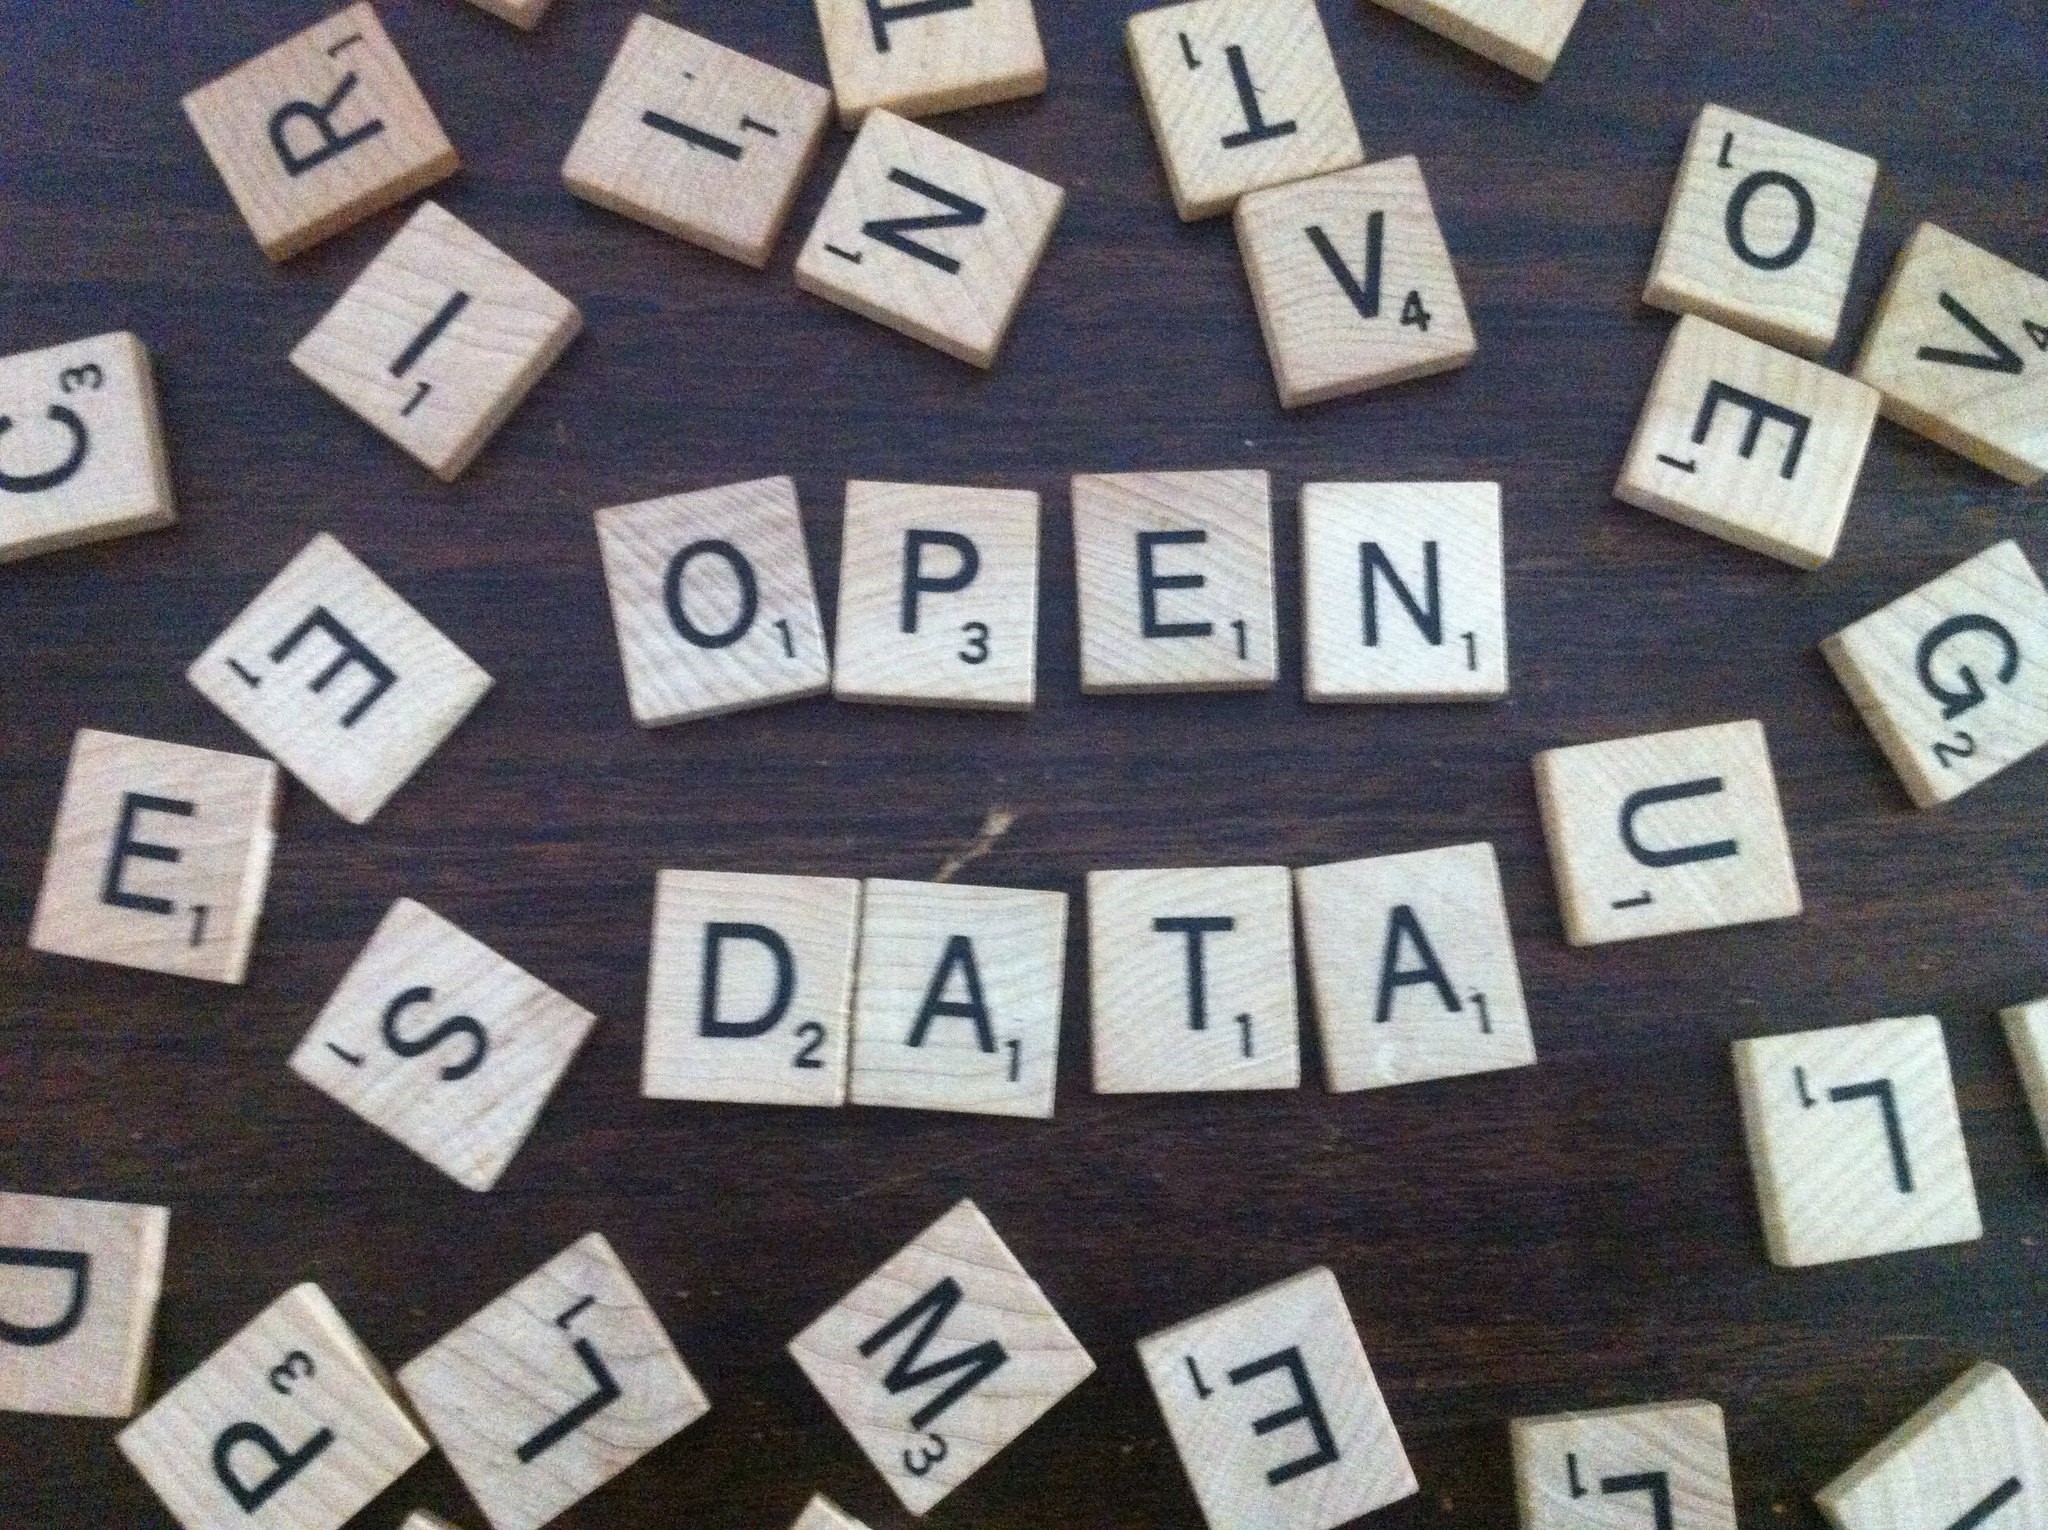 open data pic